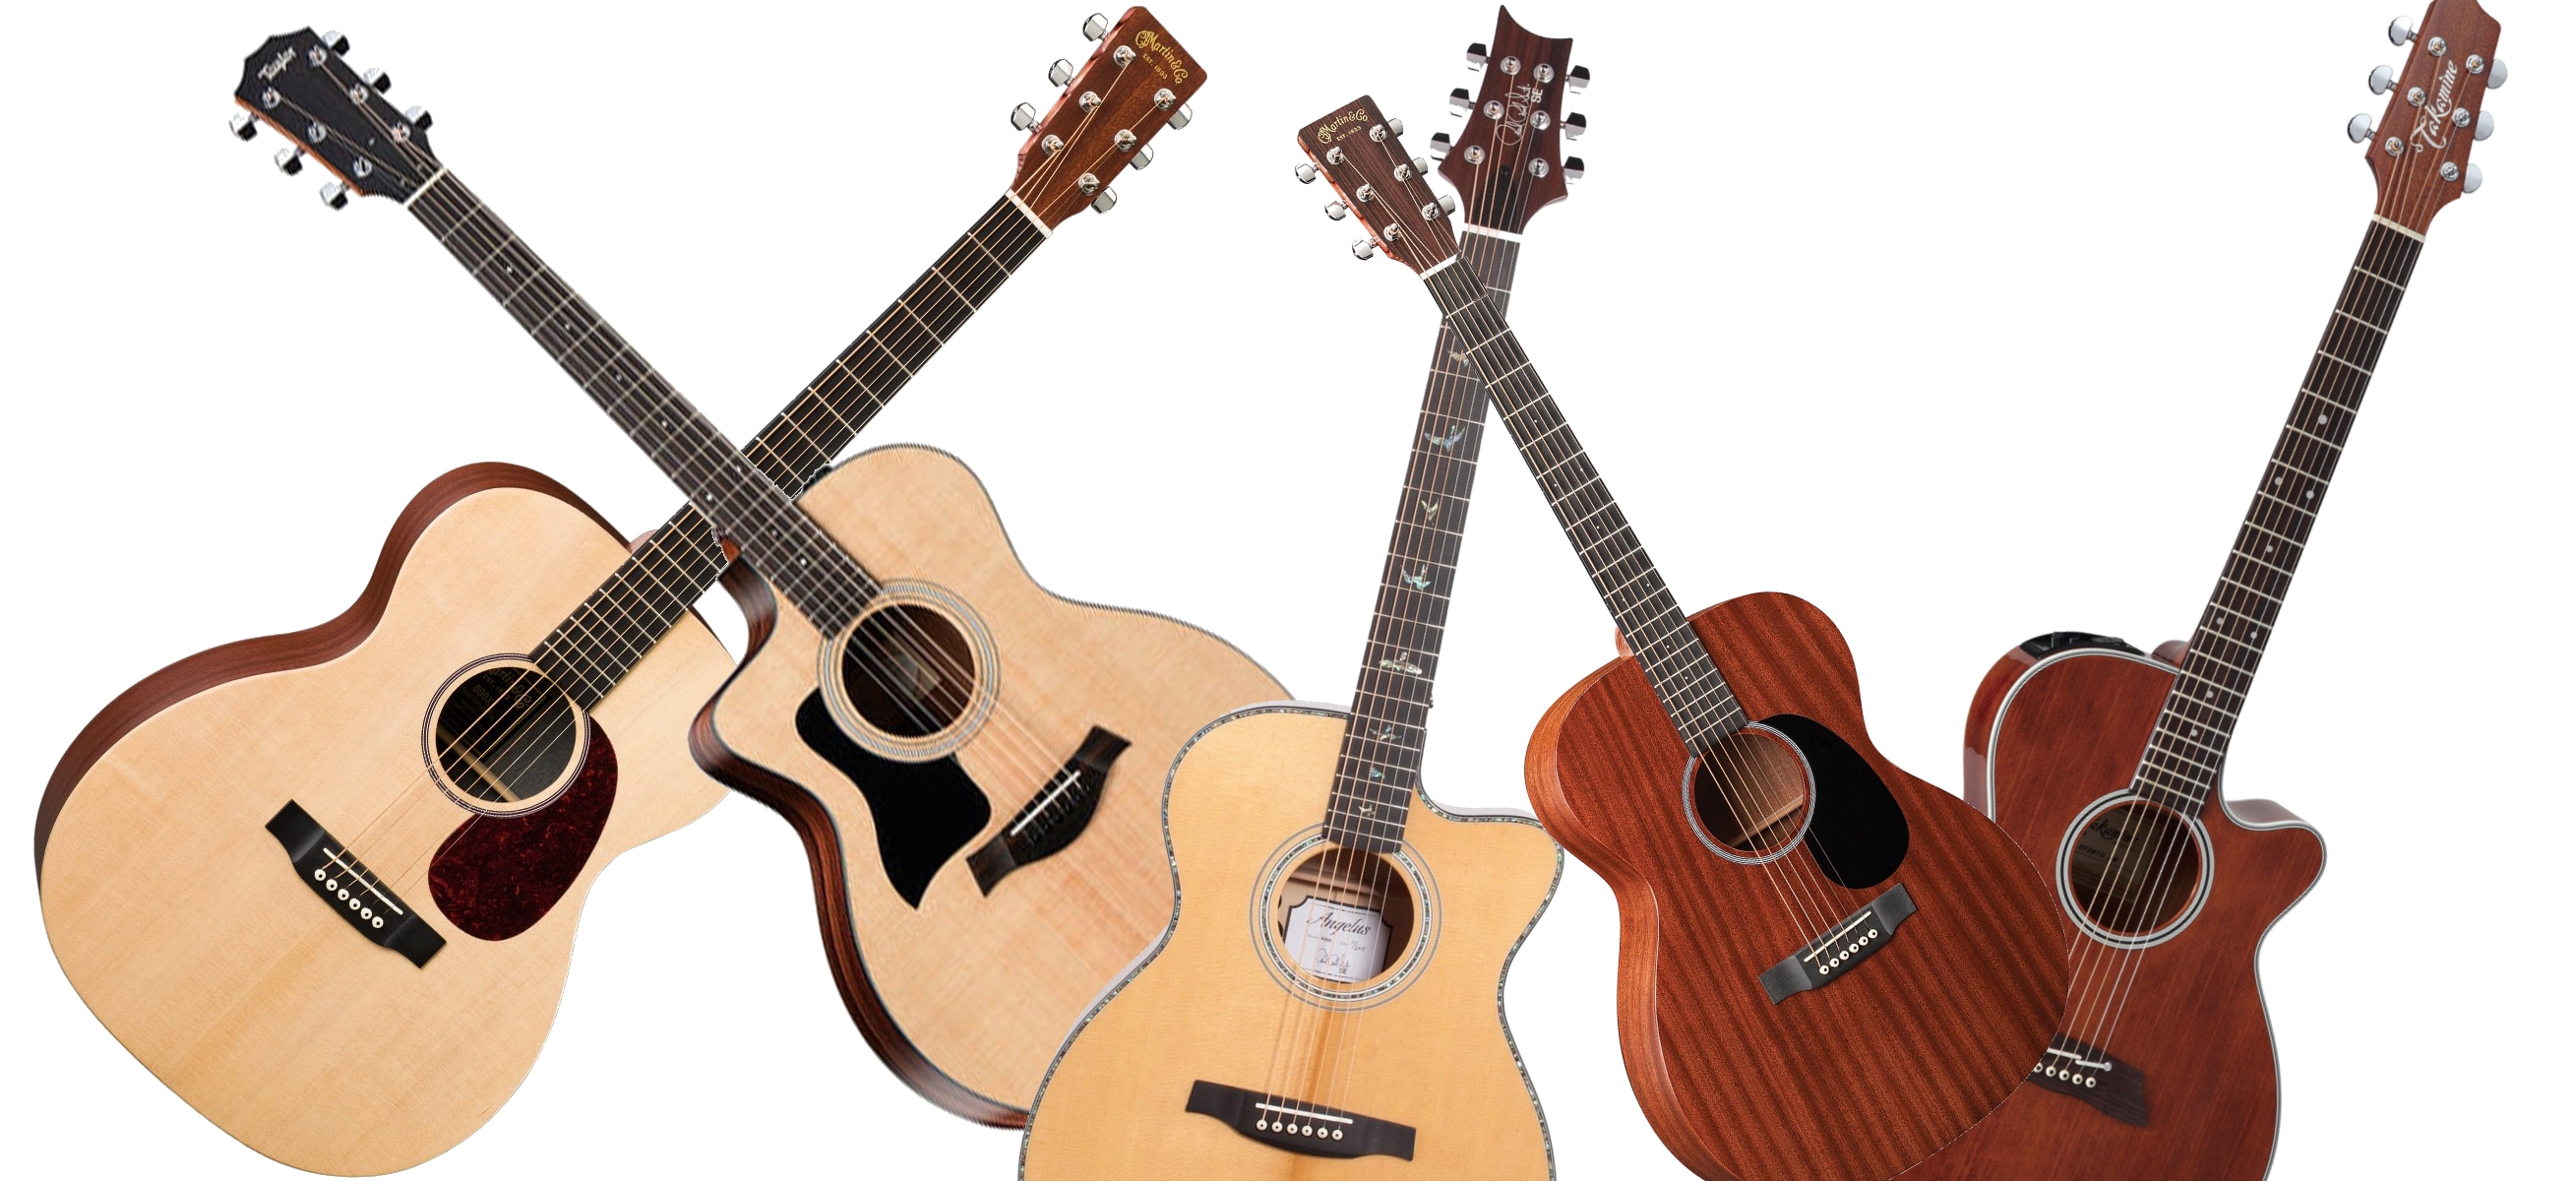 Top 5 Electro-Acoustic Guitars under £1000